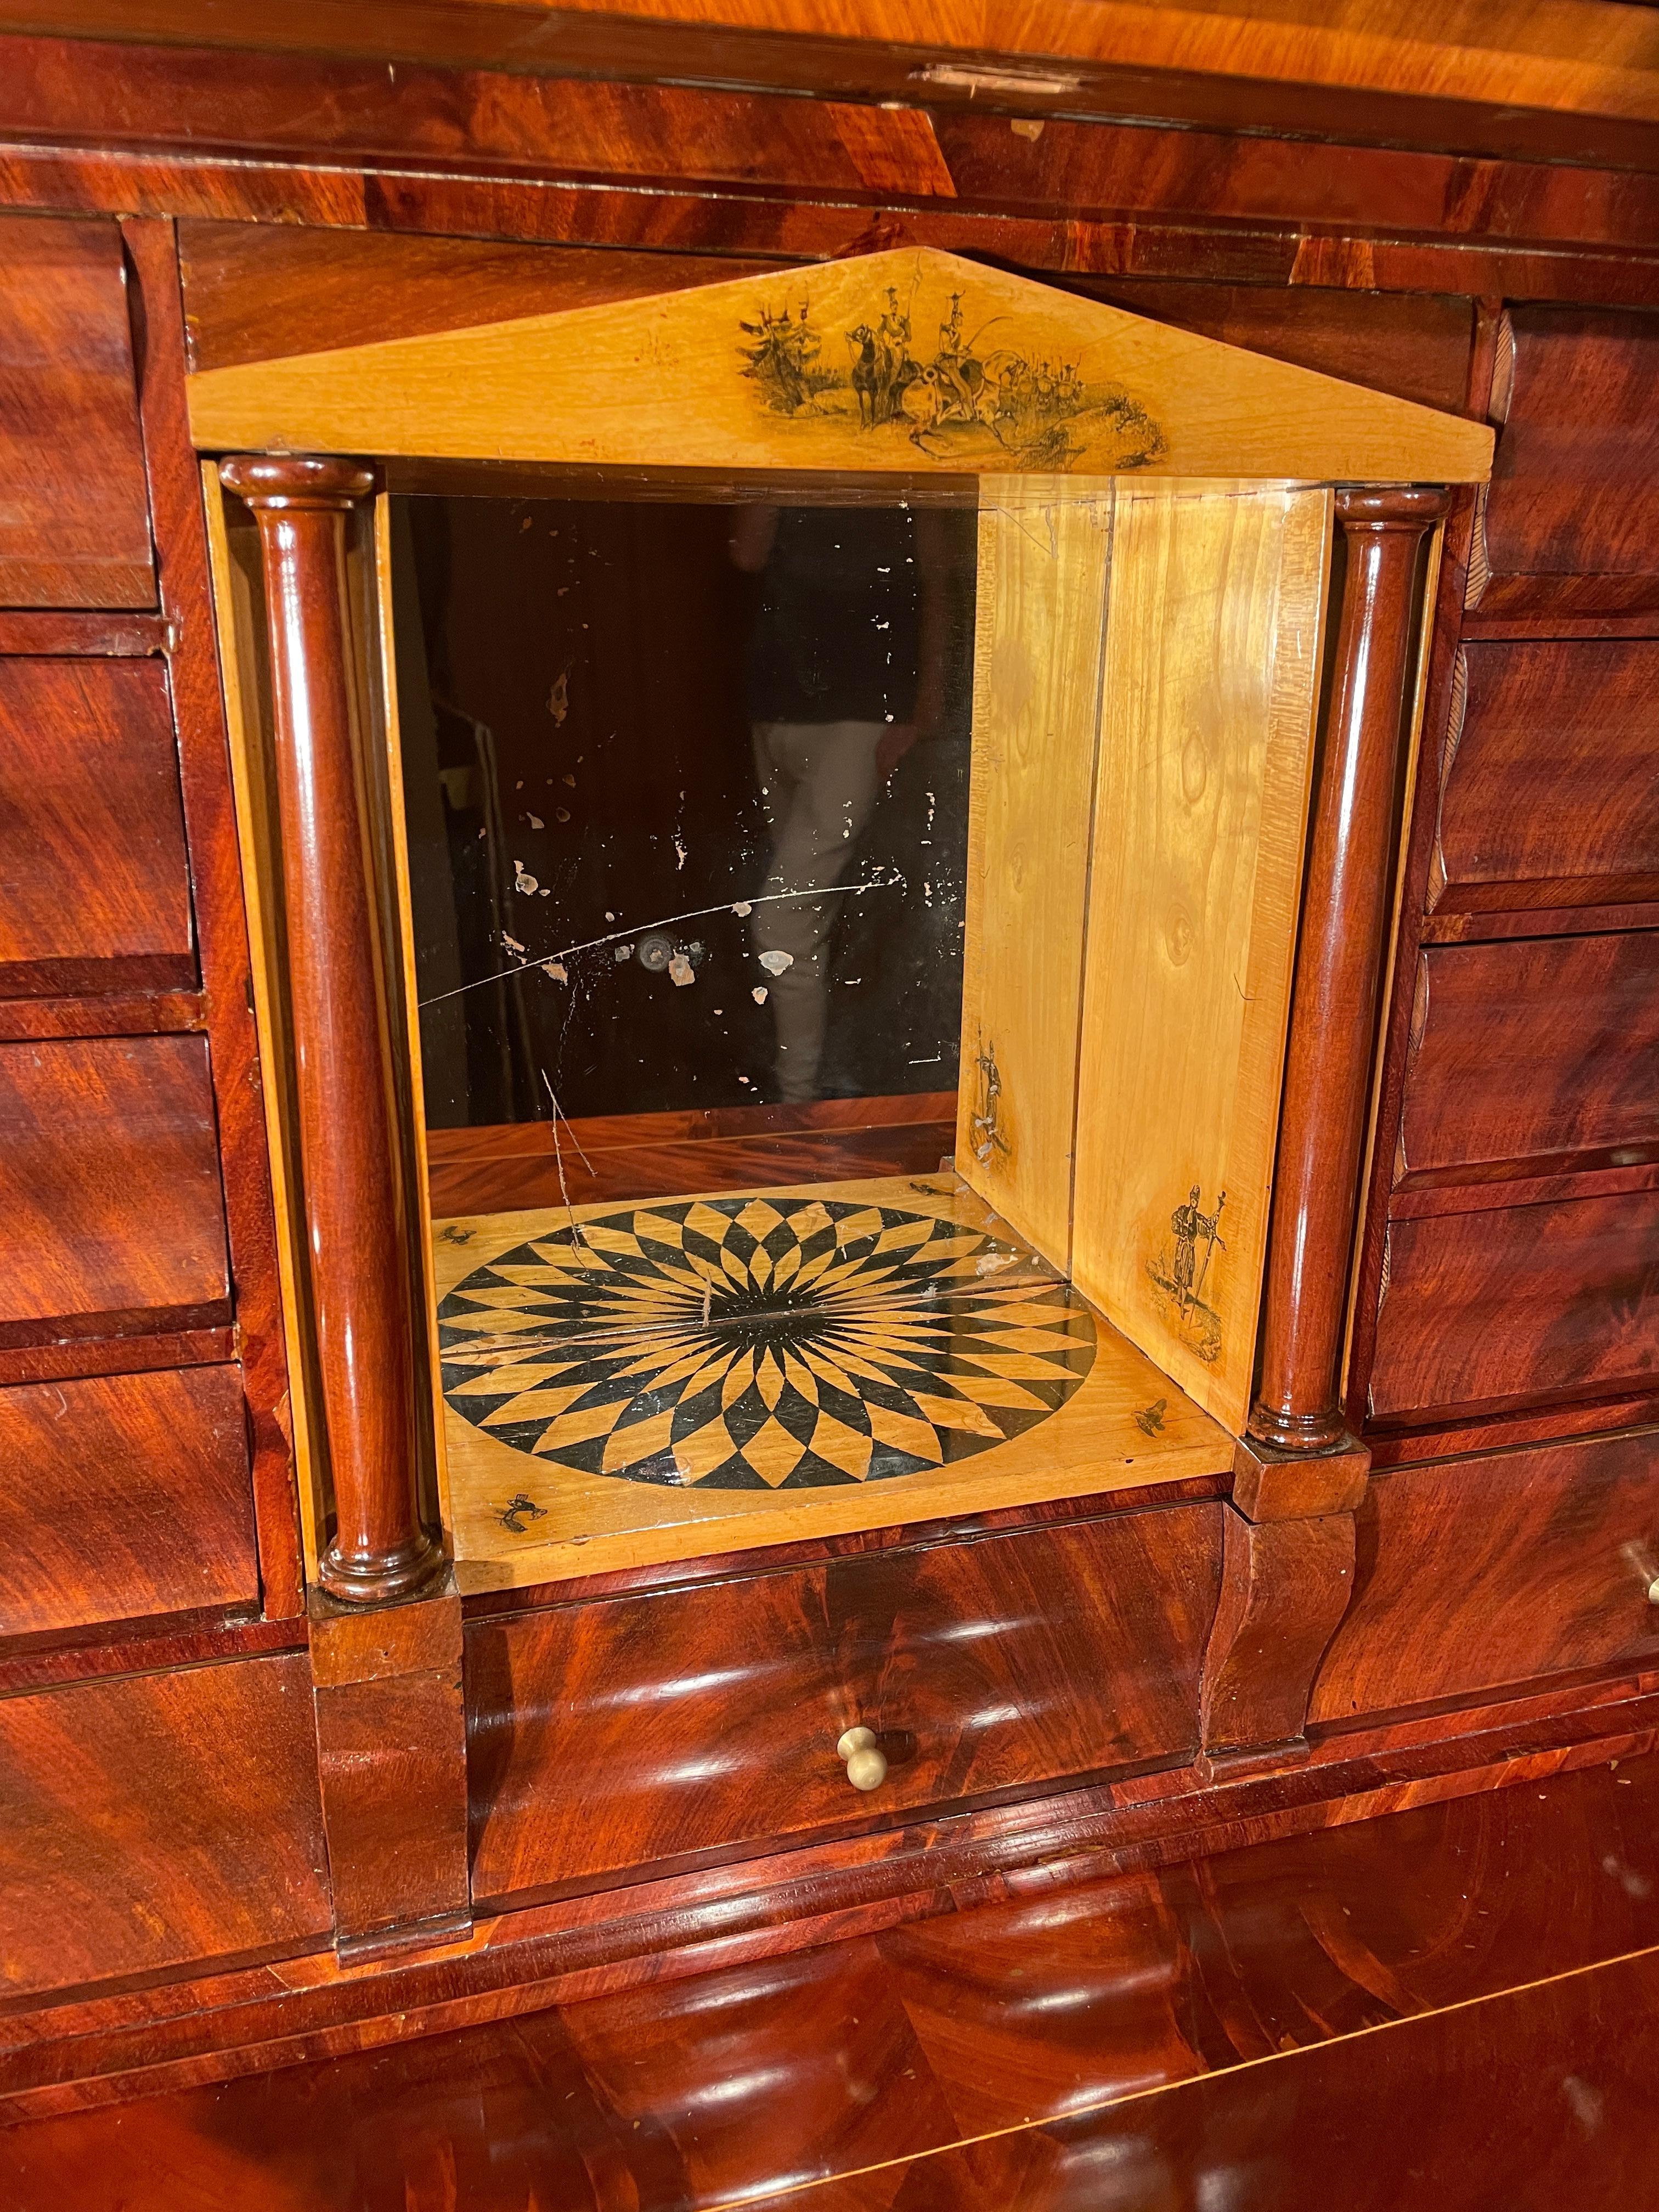 Empire drop front desk, Copenhagen 1810-20.
This unique Danish secretary desk is embellished with mahogany veneer. The lower part has three curved drawers. Two columns frame the writing flap and the lower drawers. The upper part is decorated with